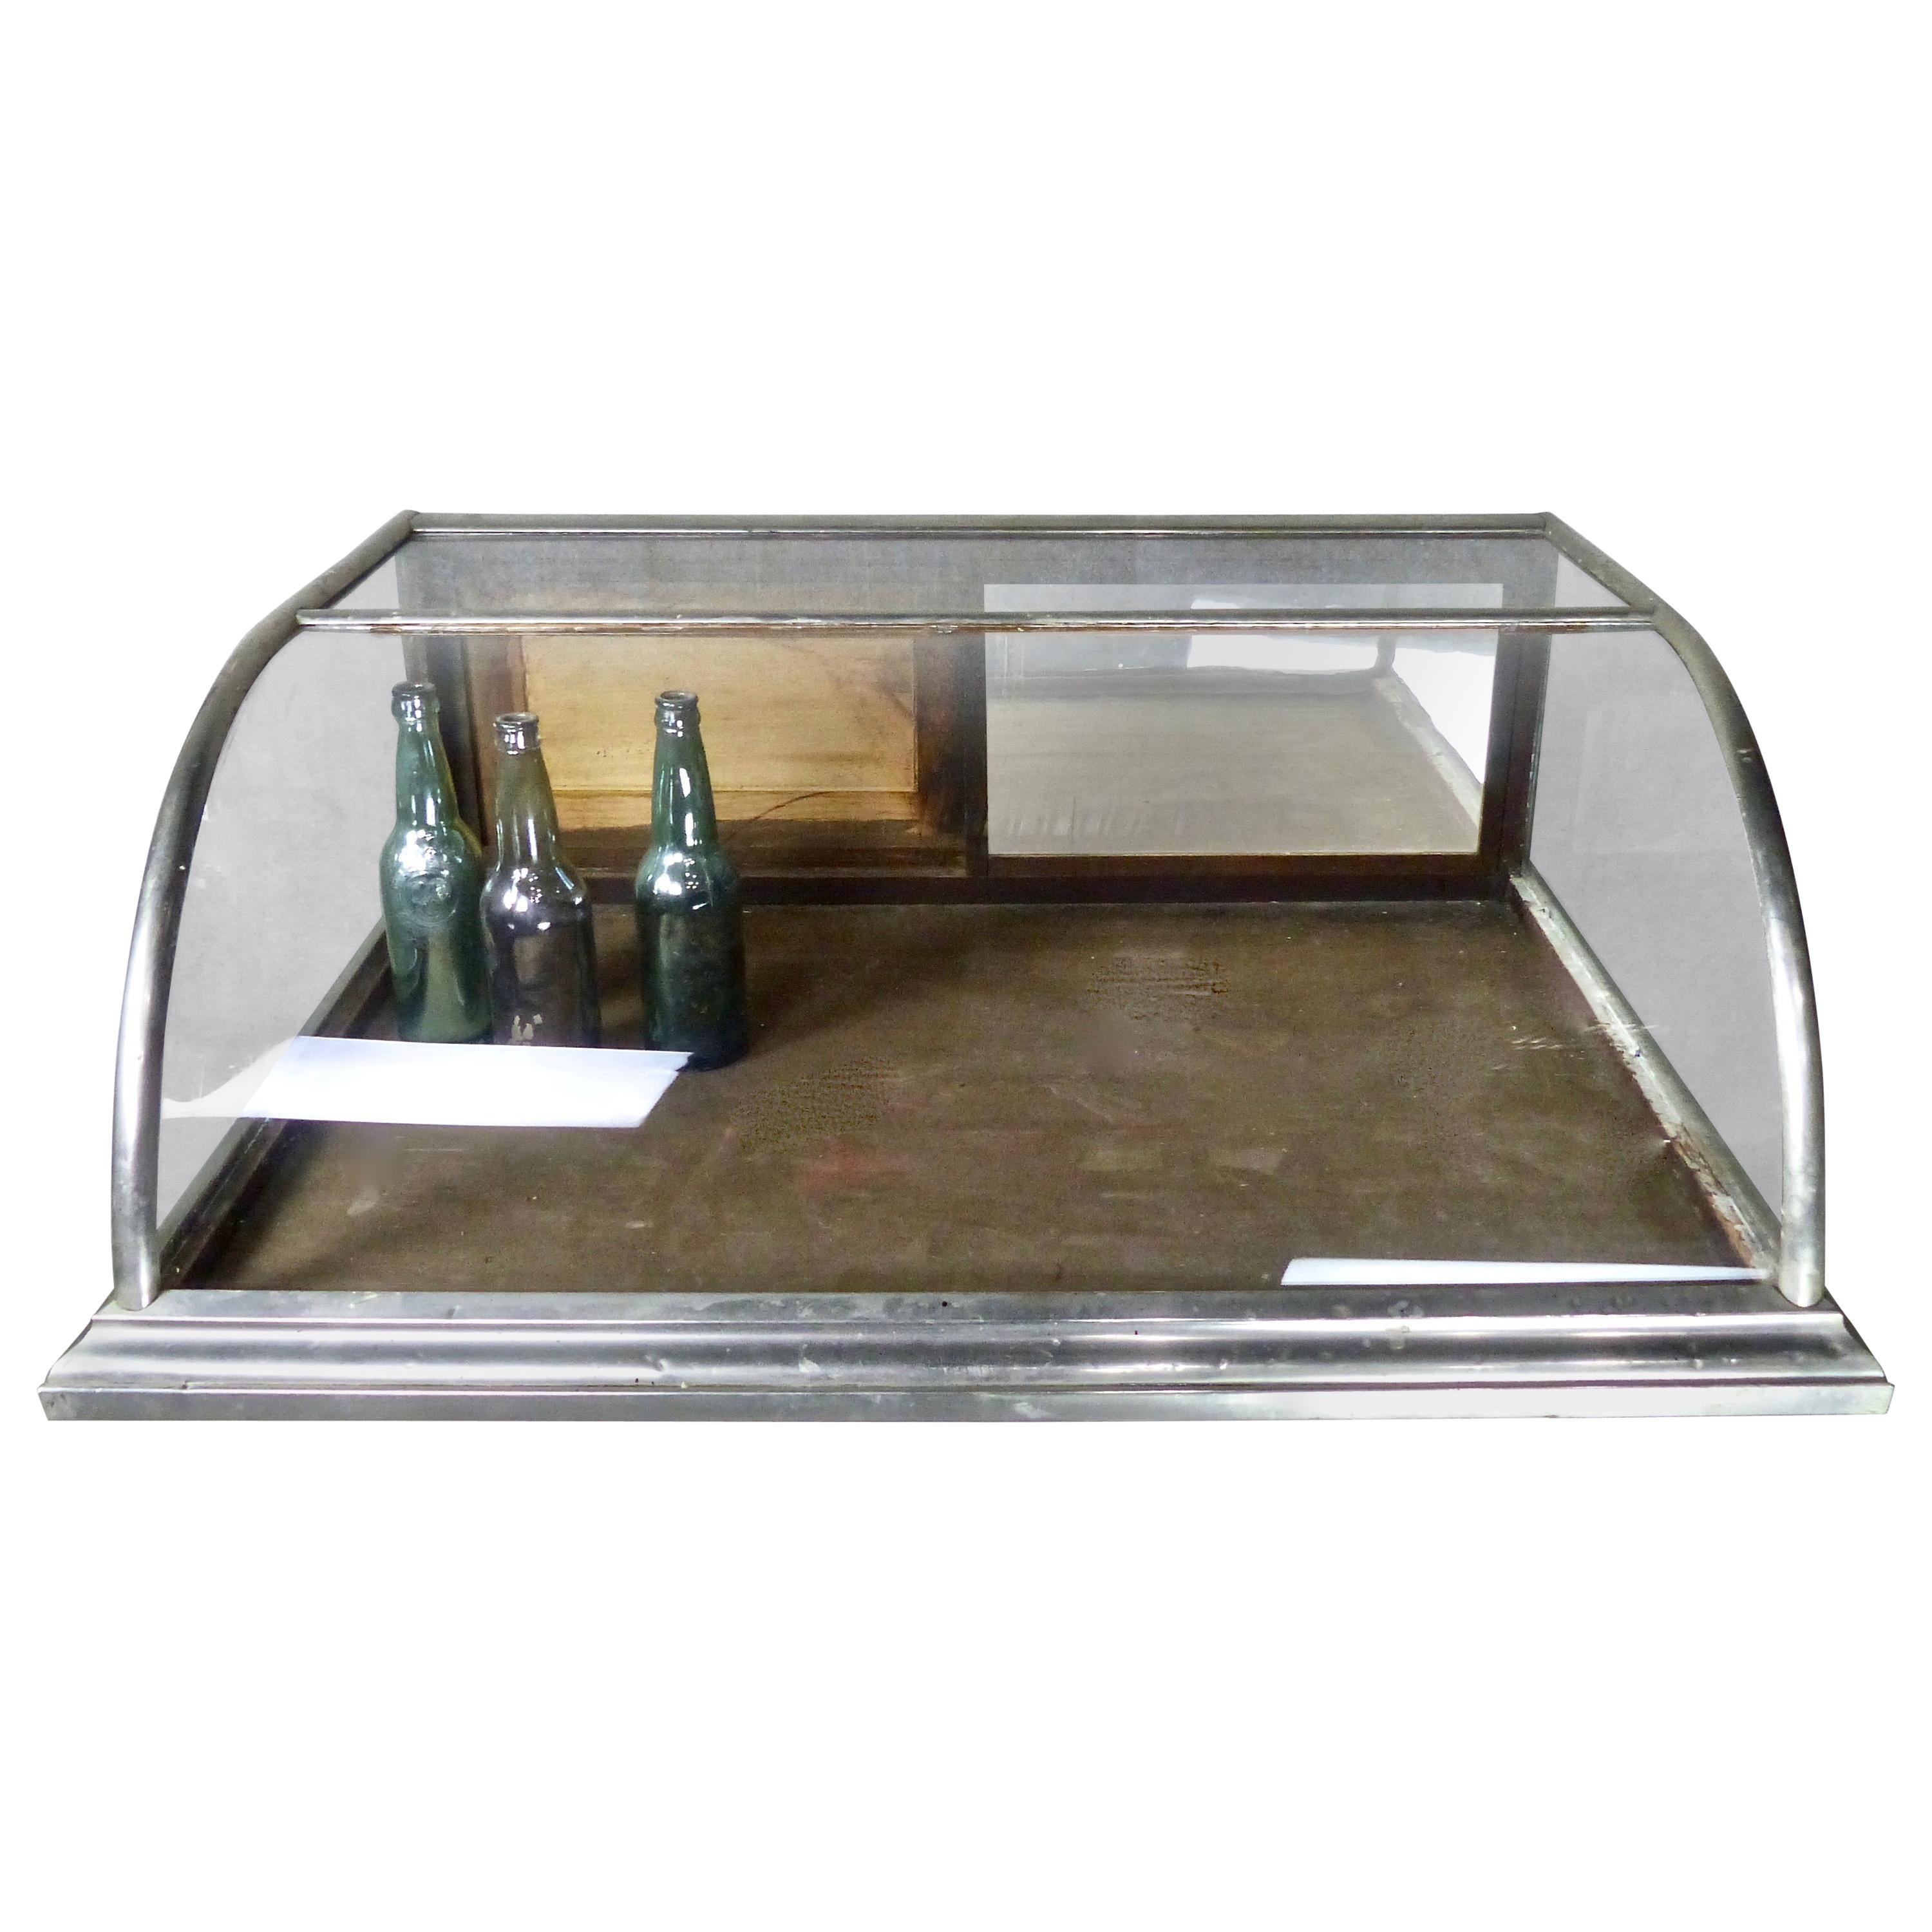 1920s Nickel-Plated Countertop Display Case by Dominion Showcase